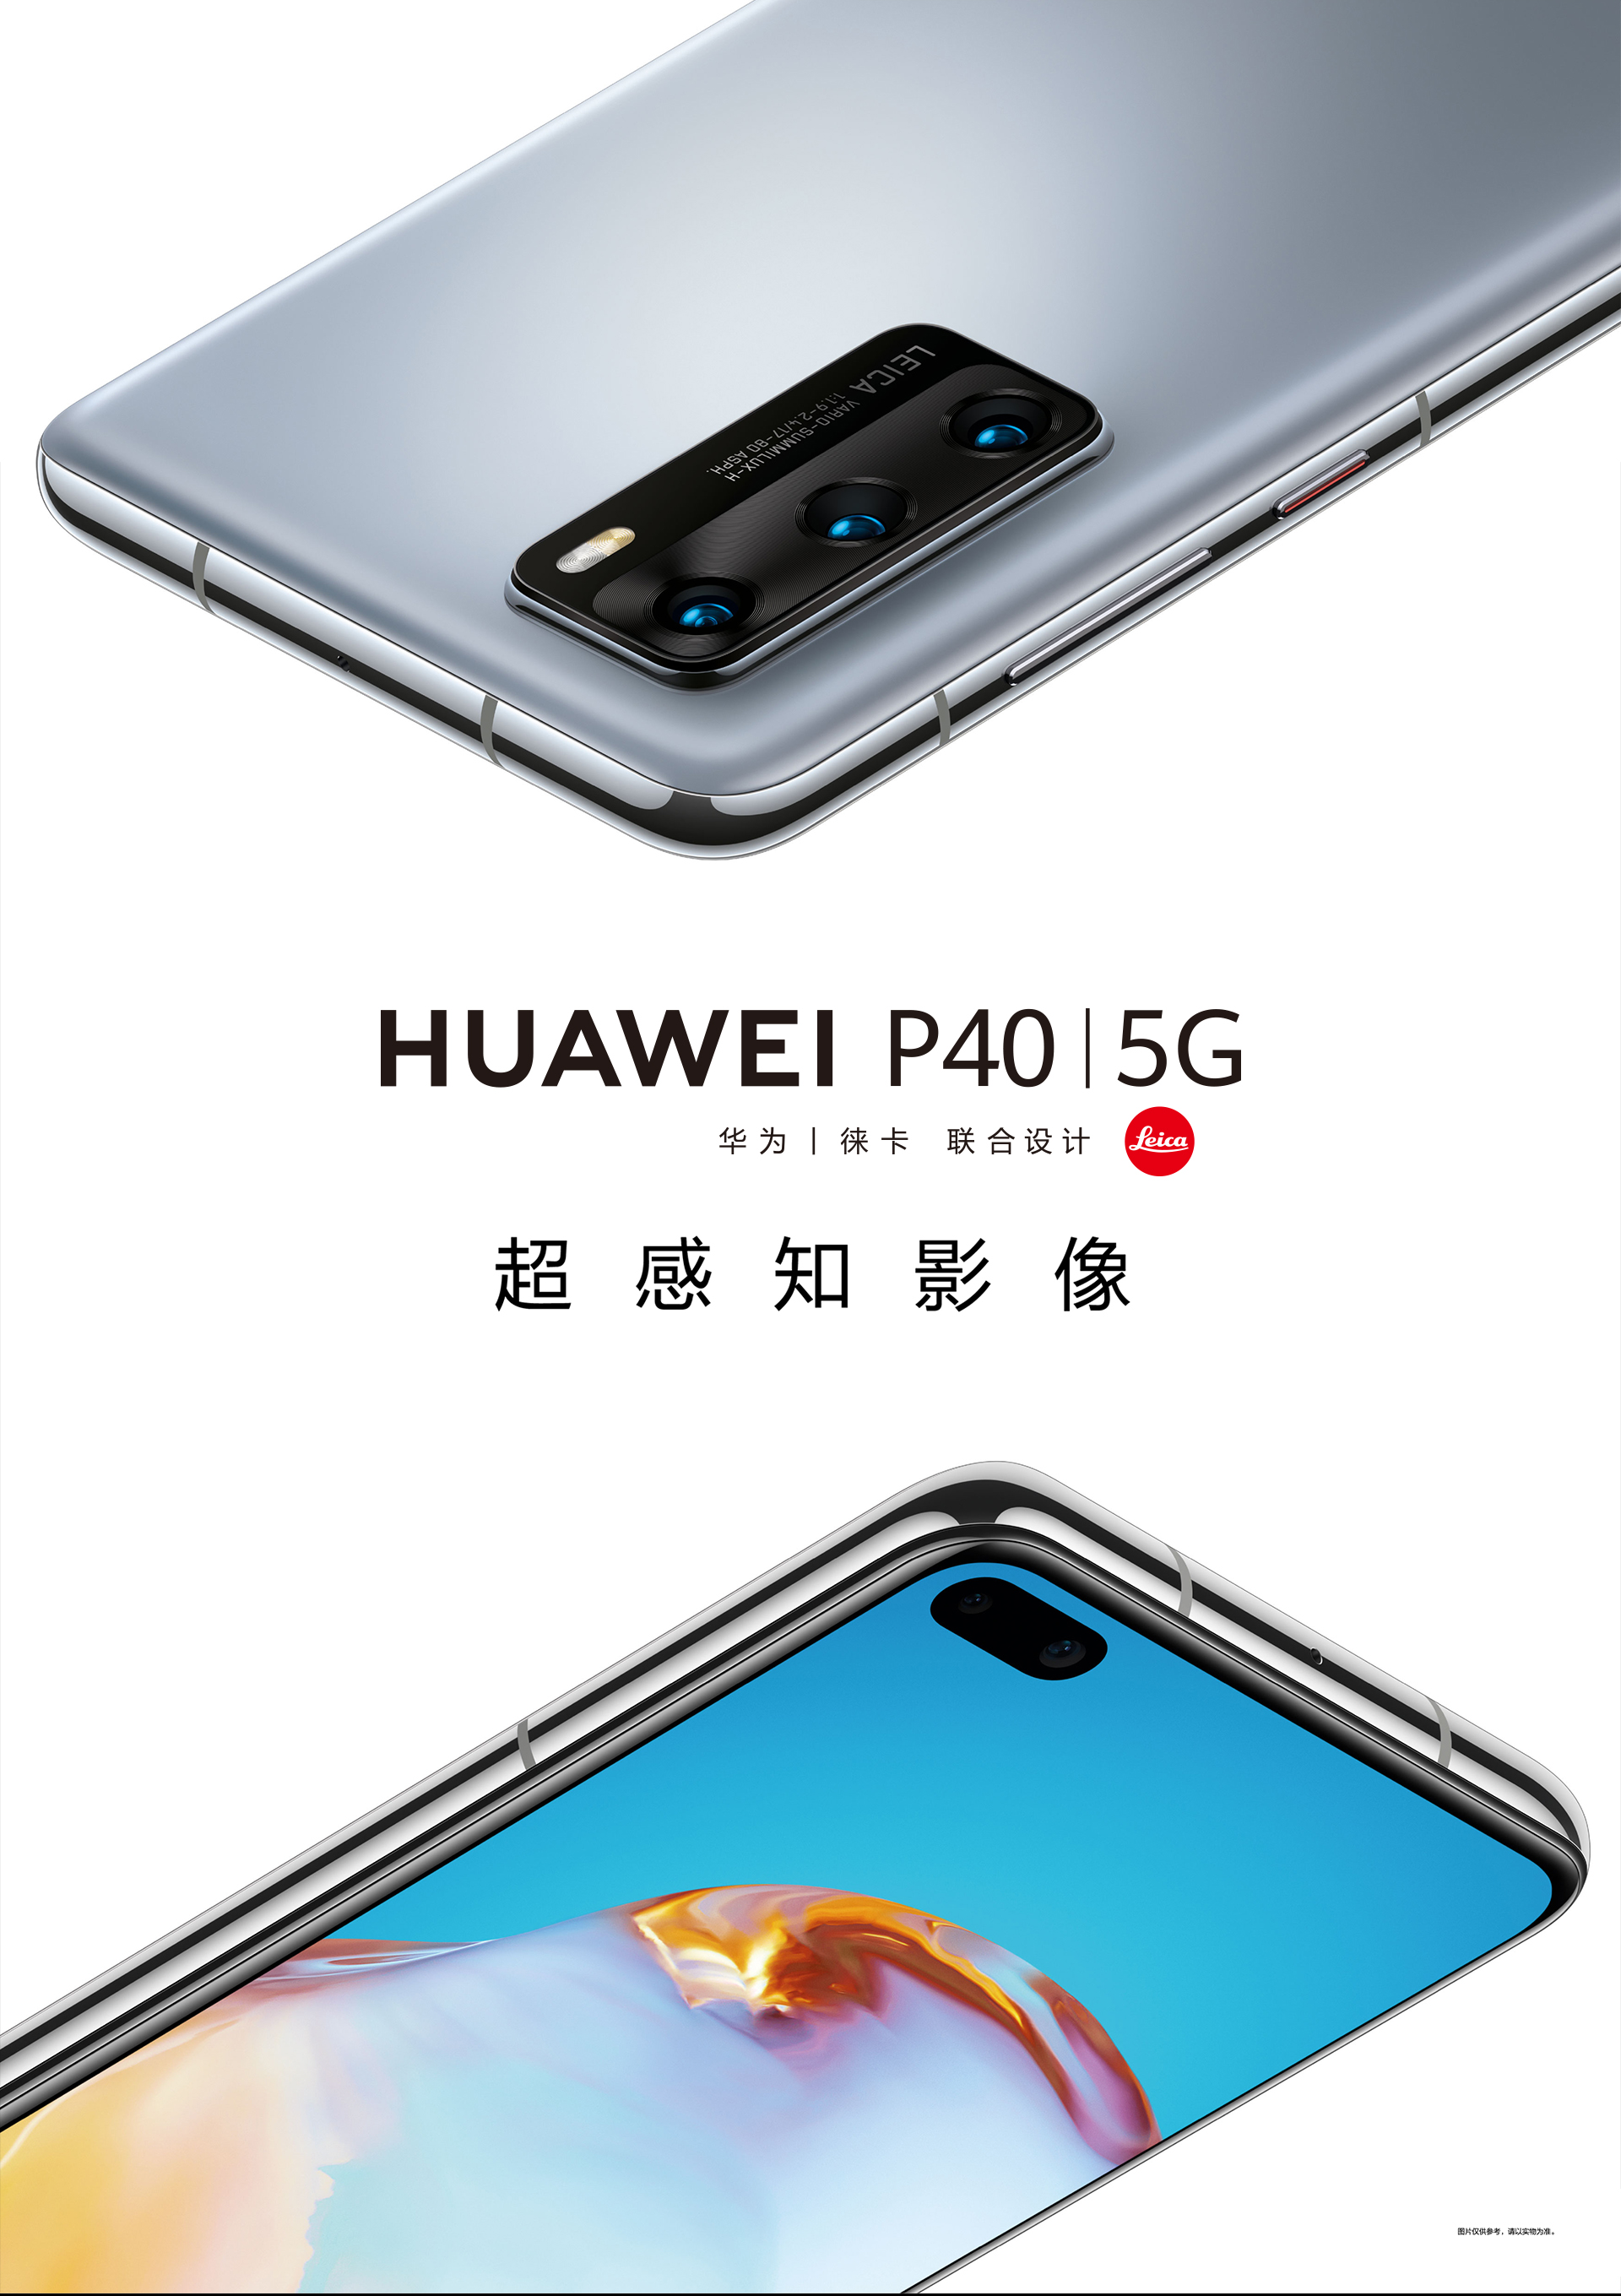 Huawei P50 and P50 Pro announced with Snapdragon 888 4G Chipset - Tech Arena24